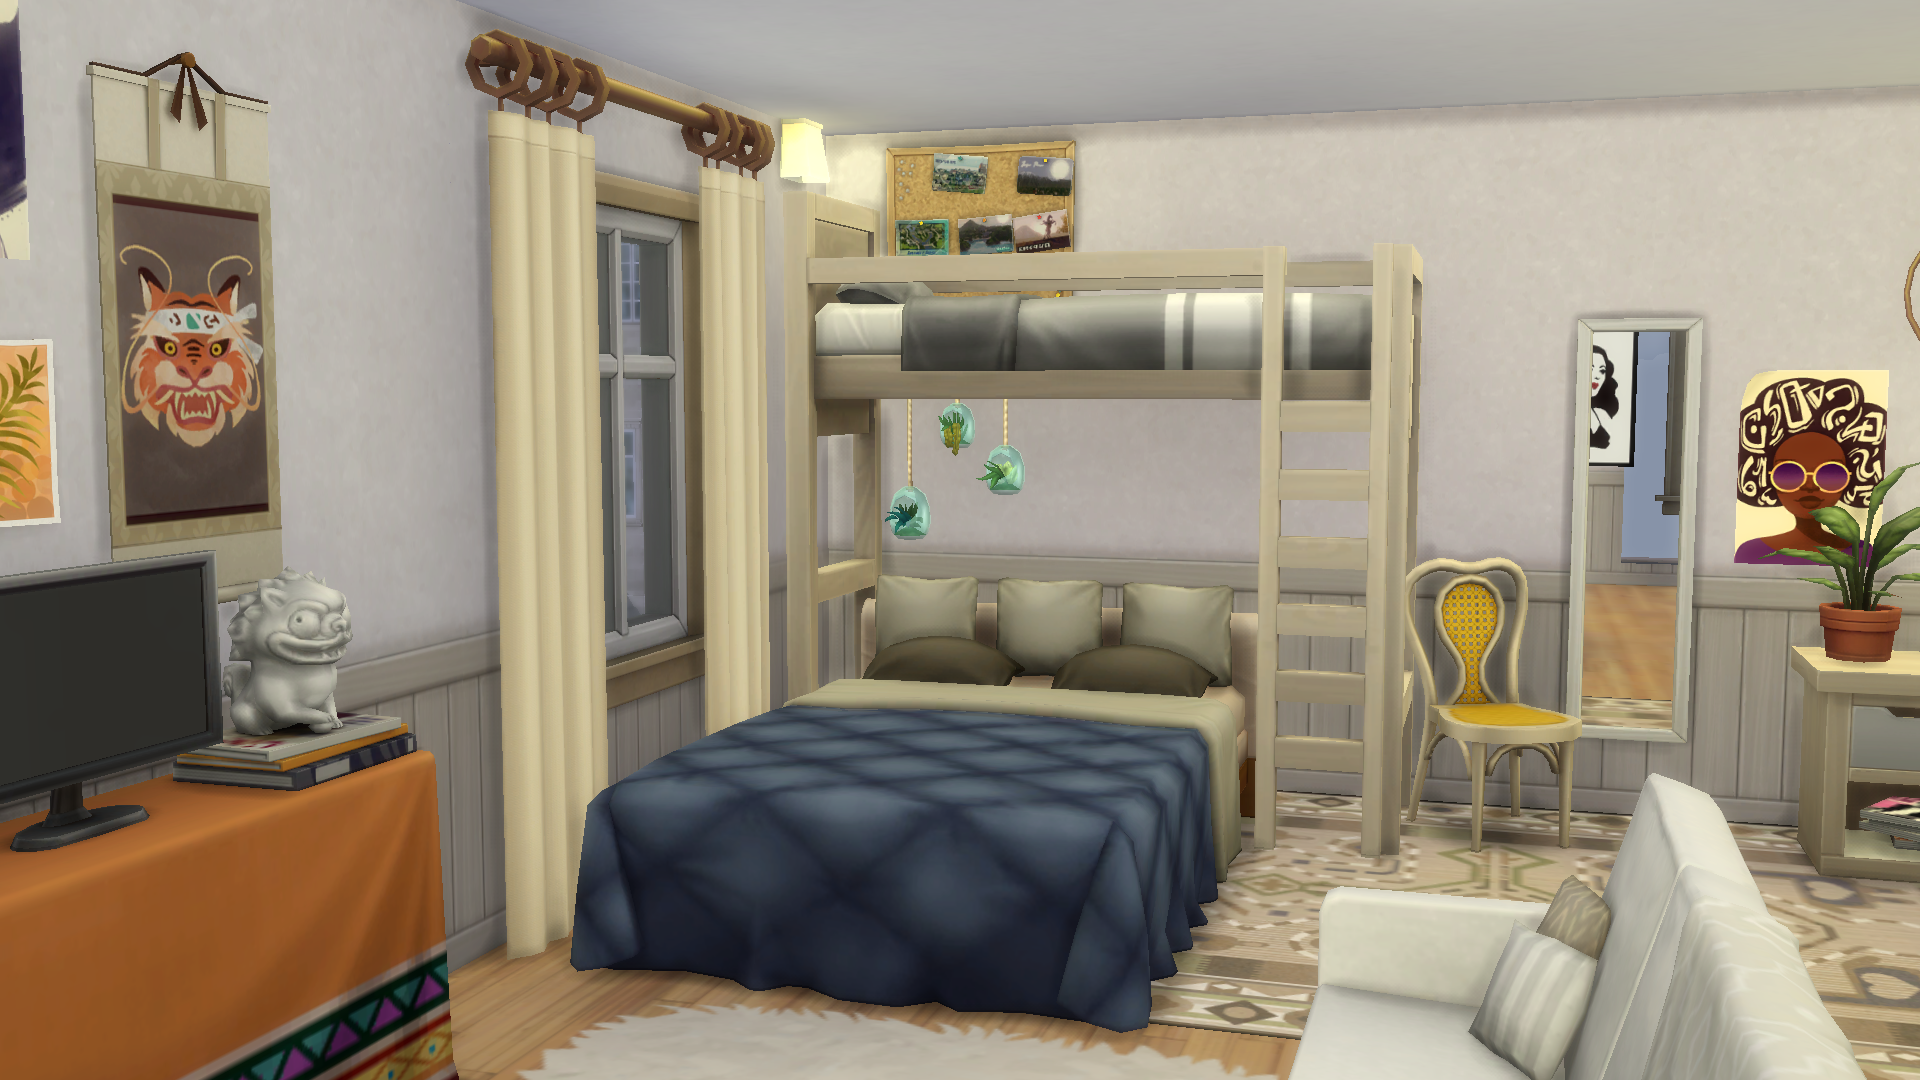 Building With Bunk Beds In The Sims 4, Sims 4 Bunk Beds